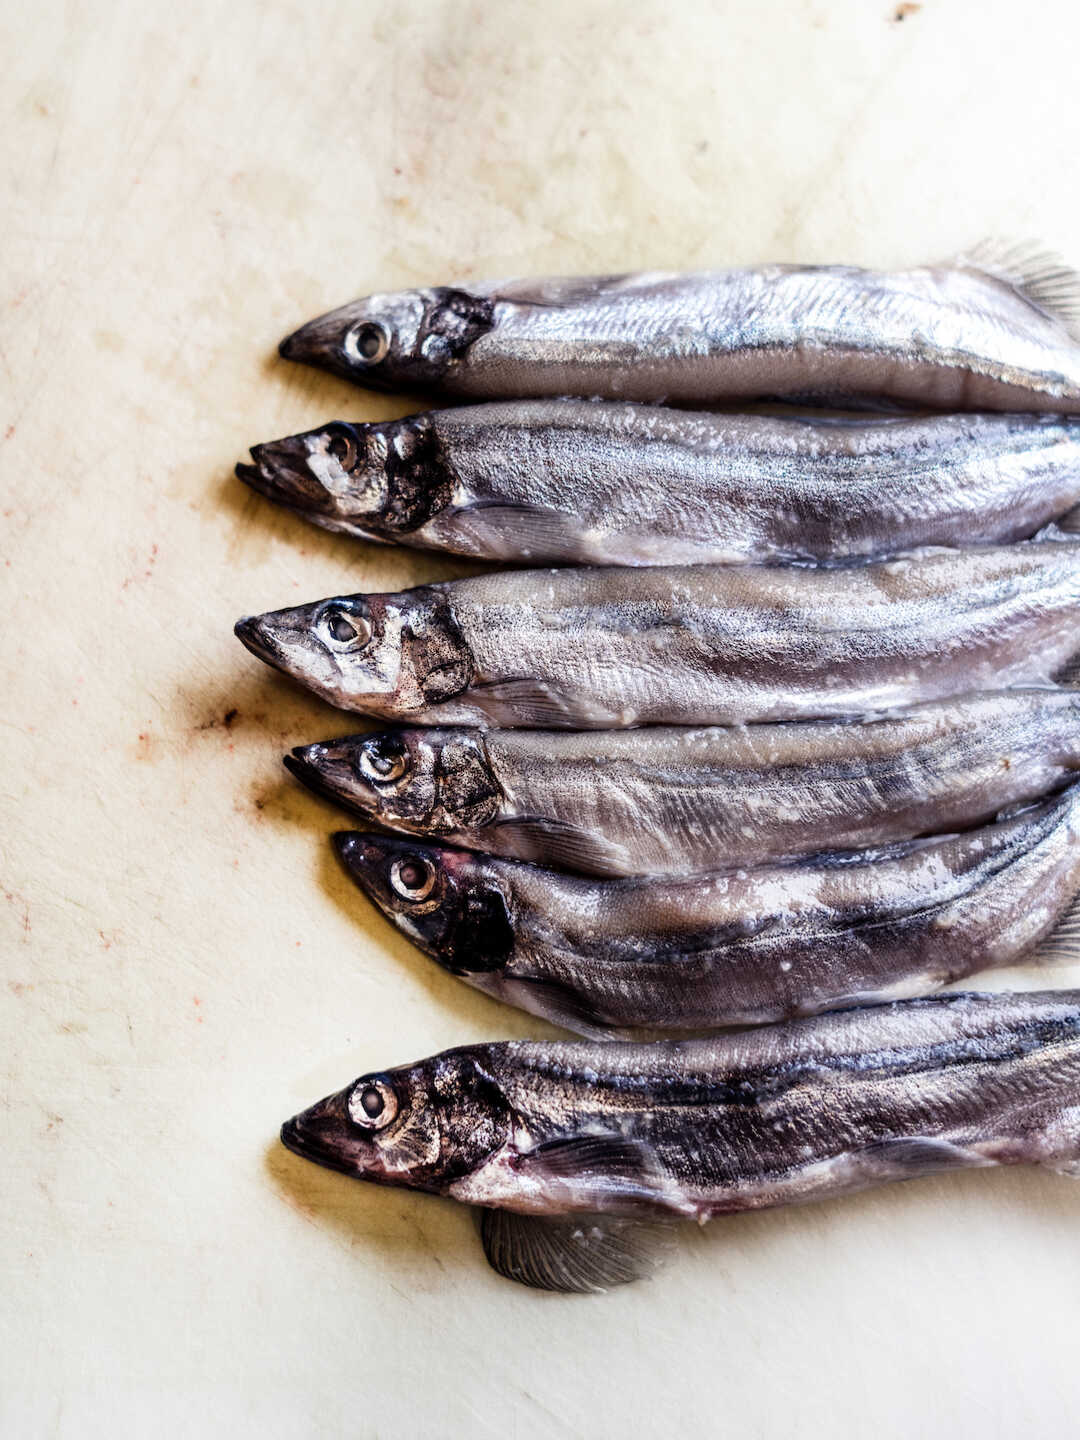 Capelin fish lay side by side on a cutting board. 